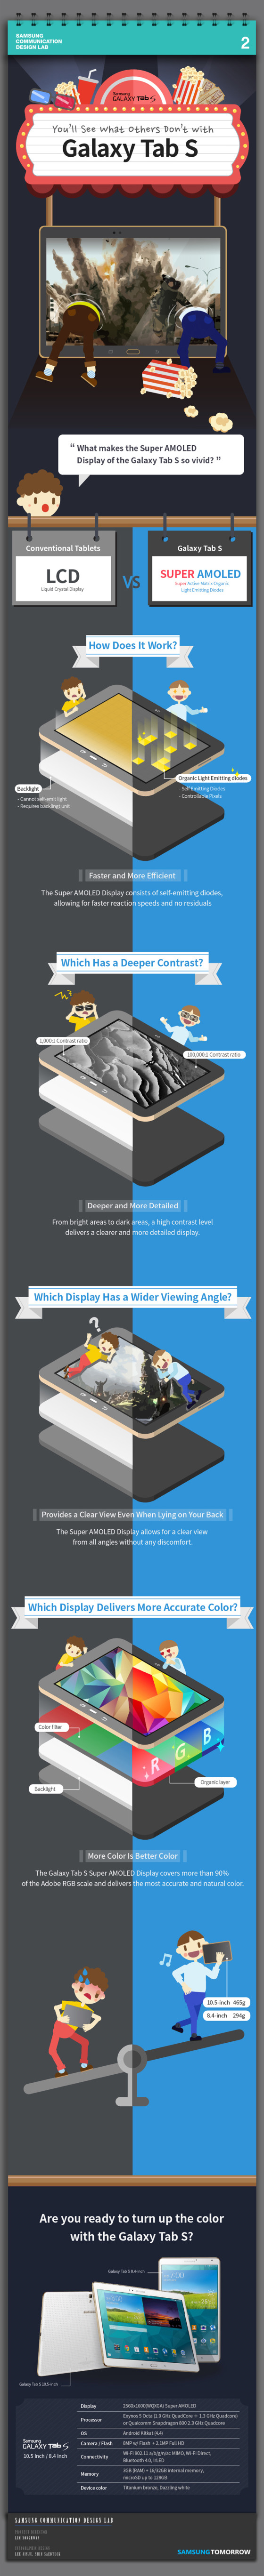 Infographic-Youll-See-What-Others-Dont-with-Galaxy-Tab-S